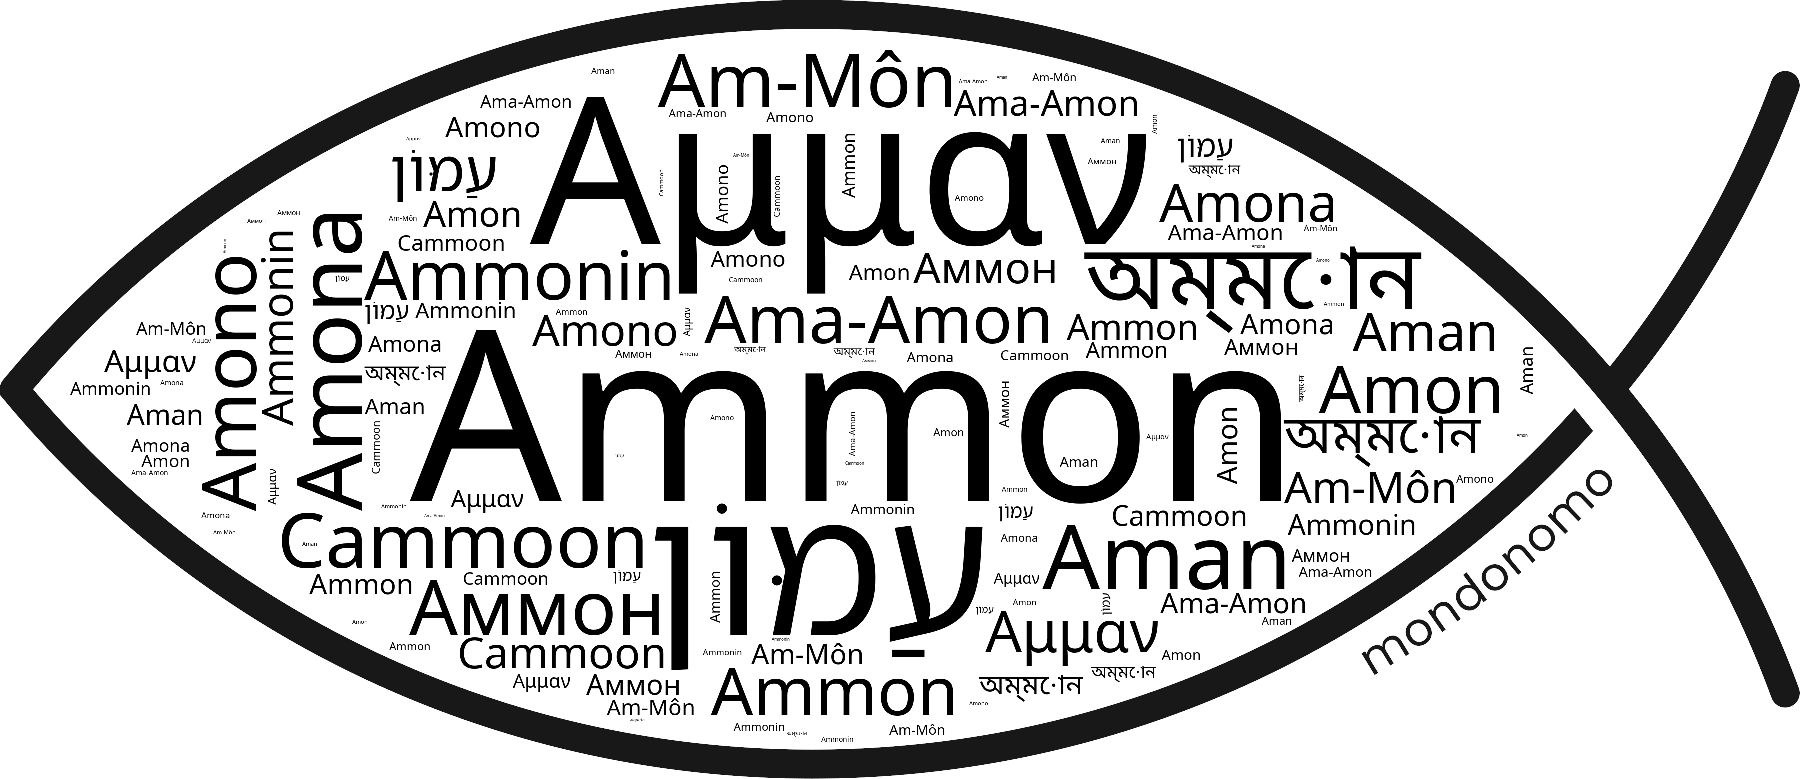 Name Ammon in the world's Bibles